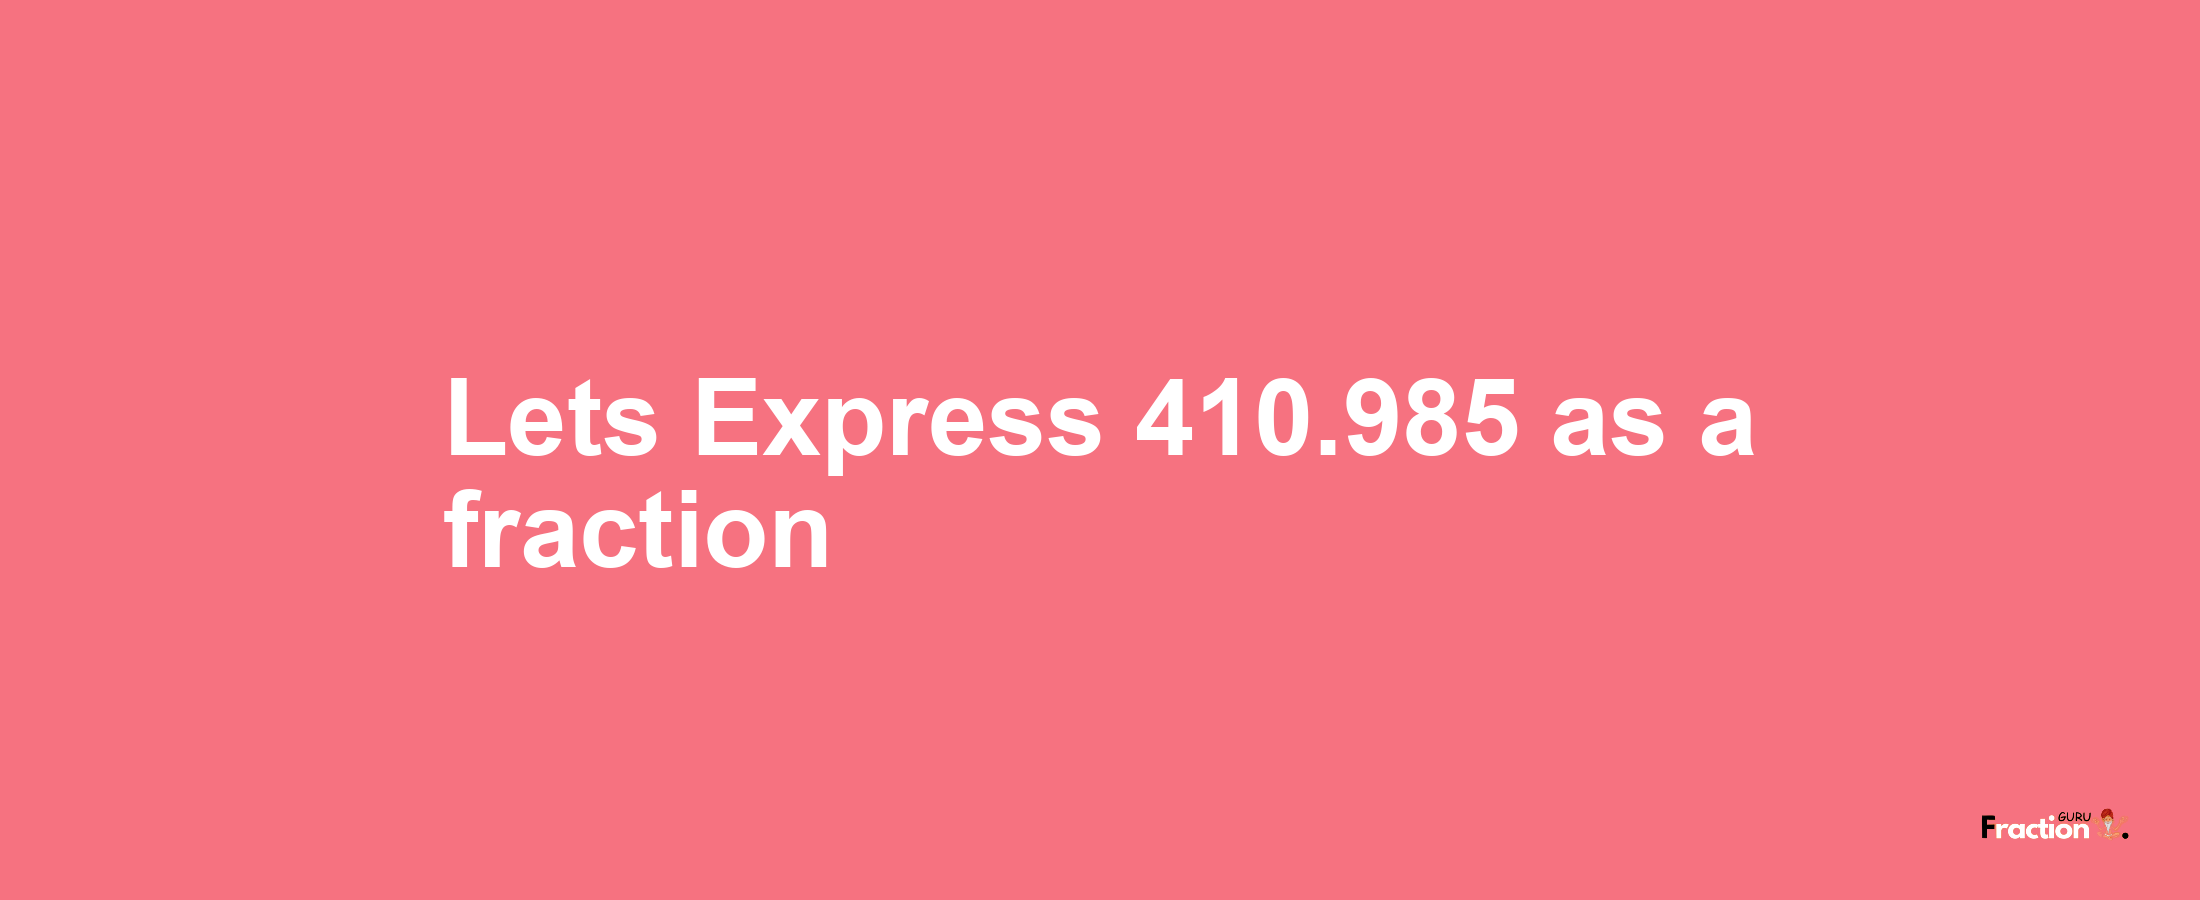 Lets Express 410.985 as afraction